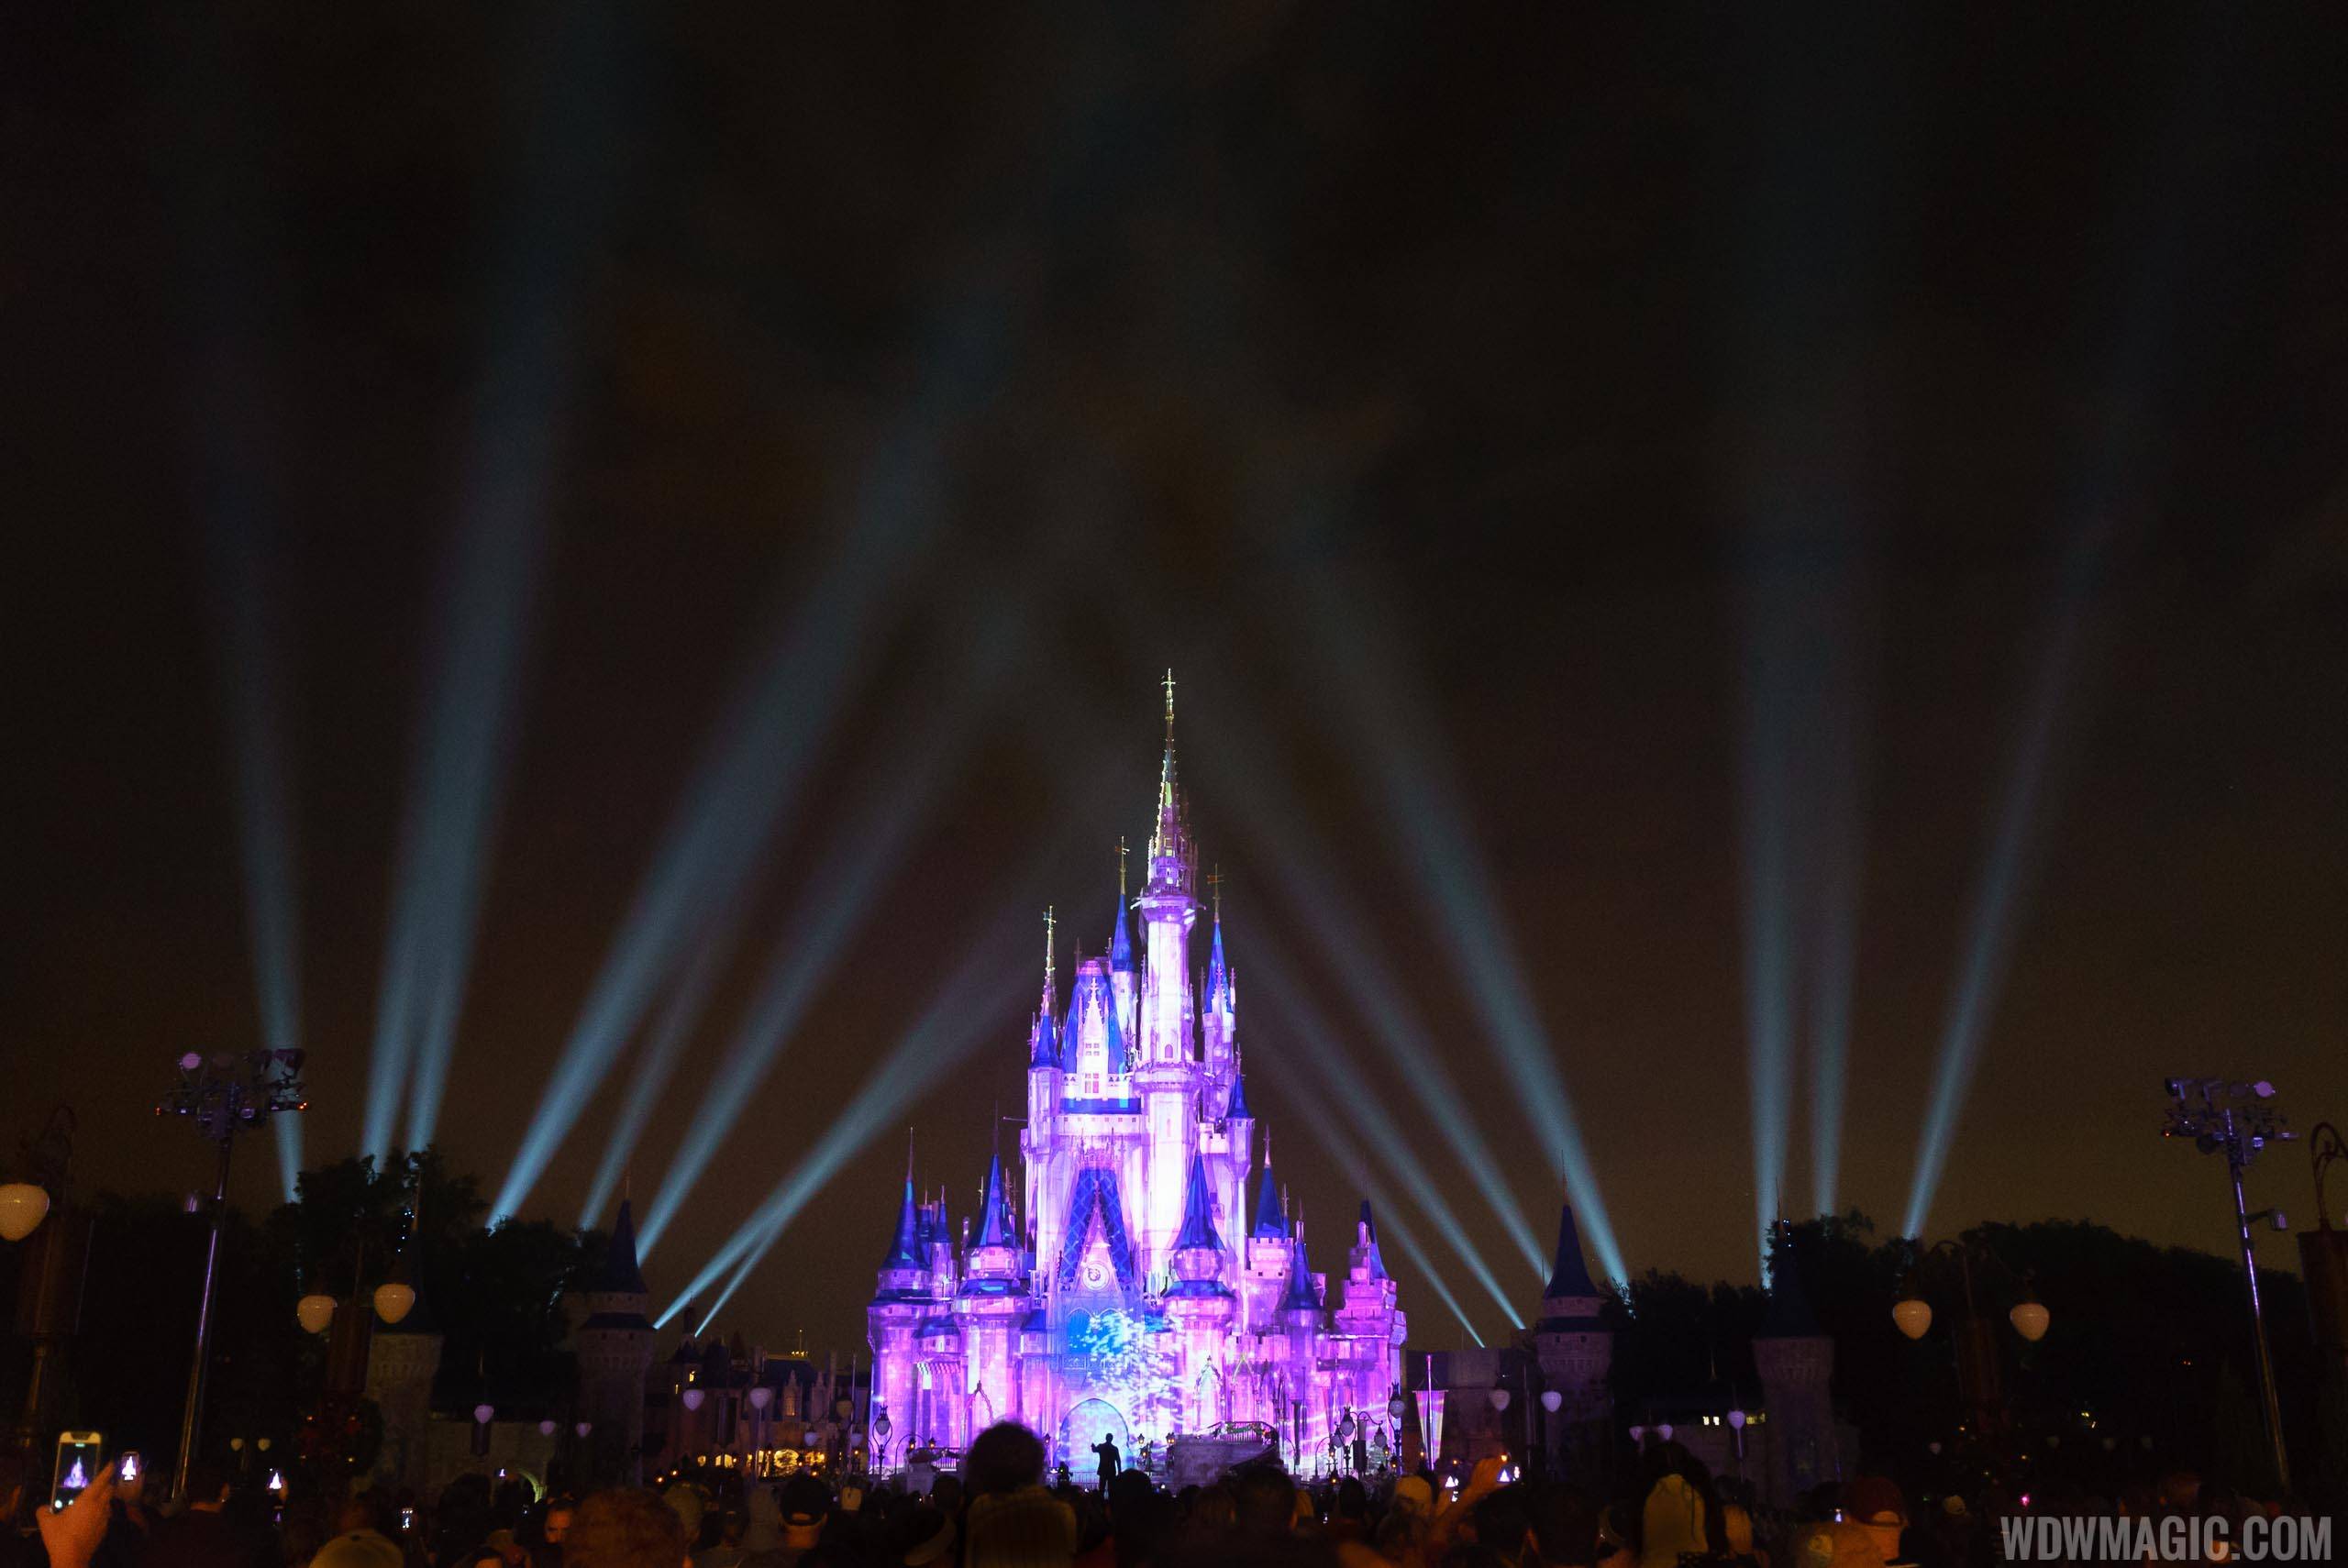 VIDEO - 'Once Upon A Time' castle projection show debuts at the Magic Kingdom